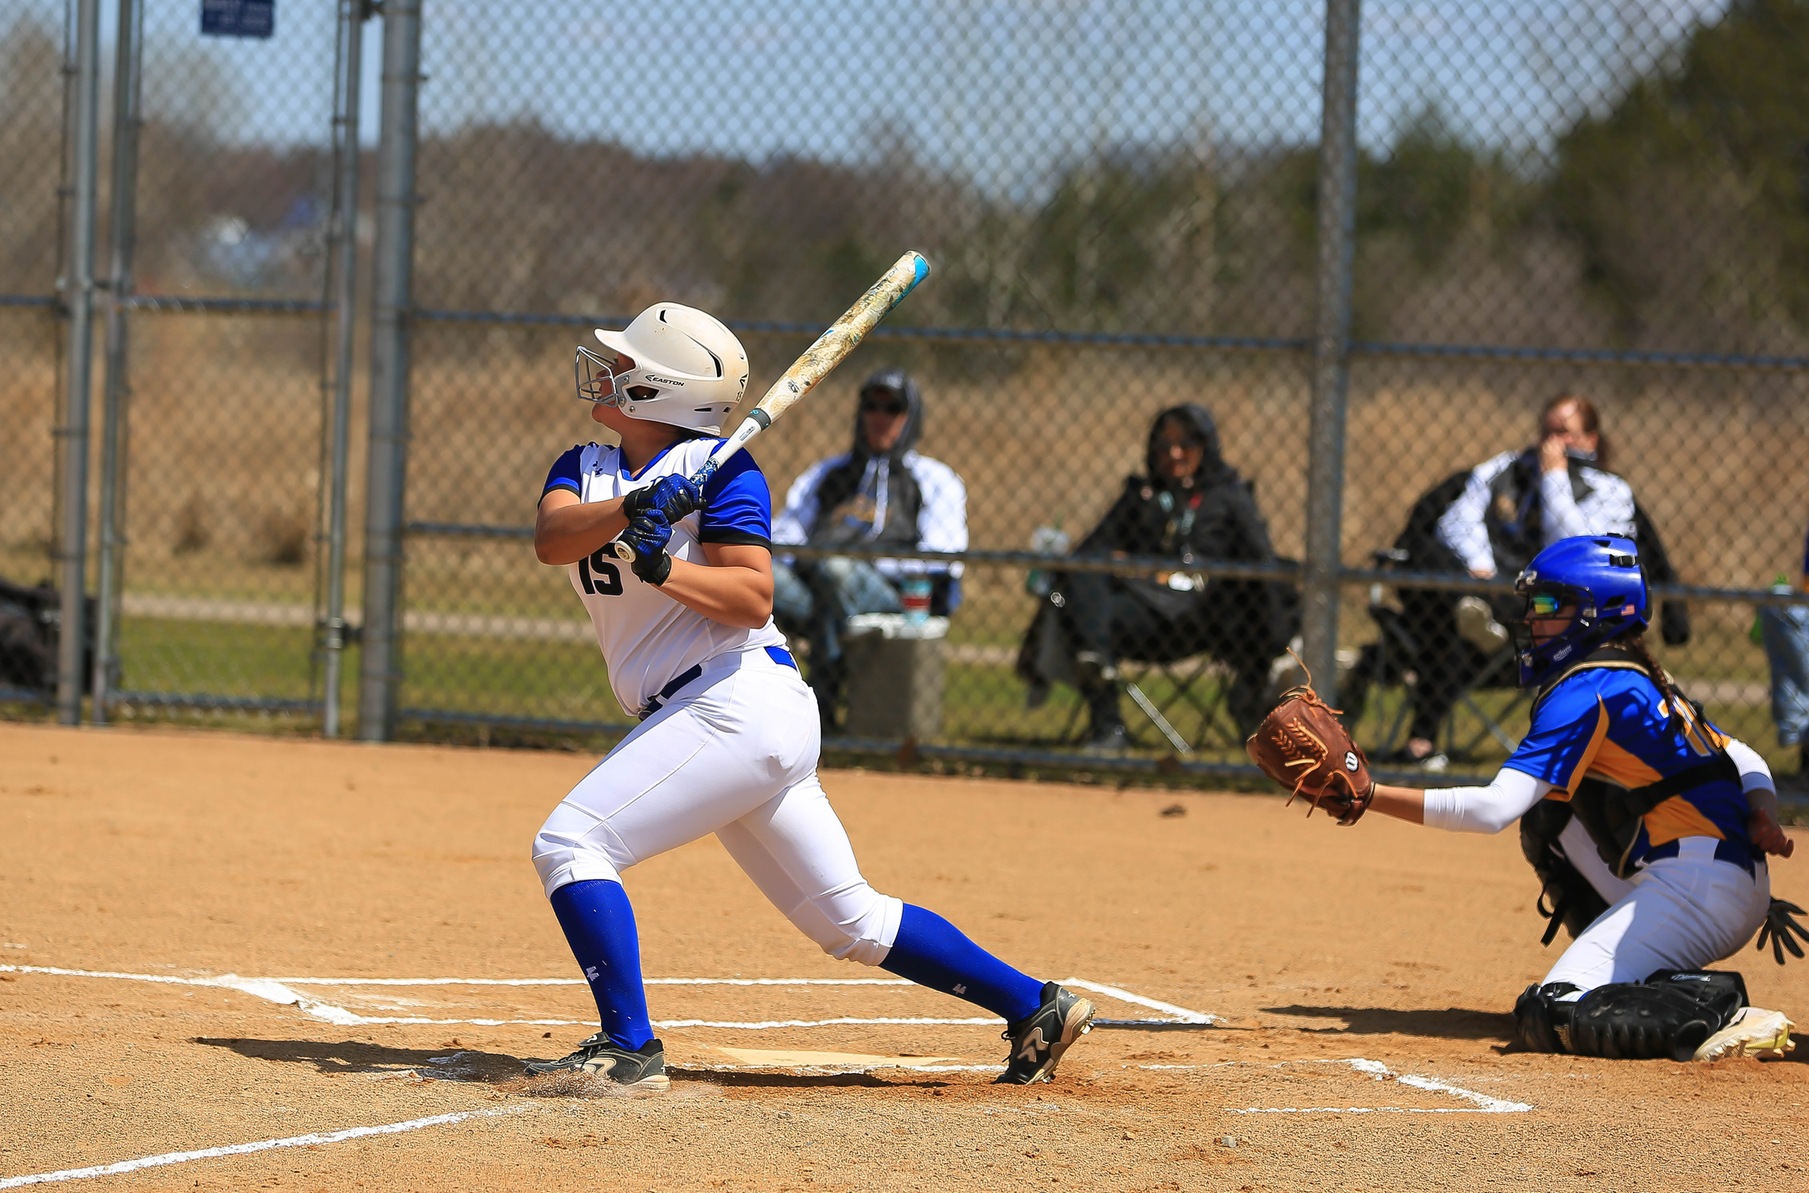 Softball Sweeps Gogebic in four game series